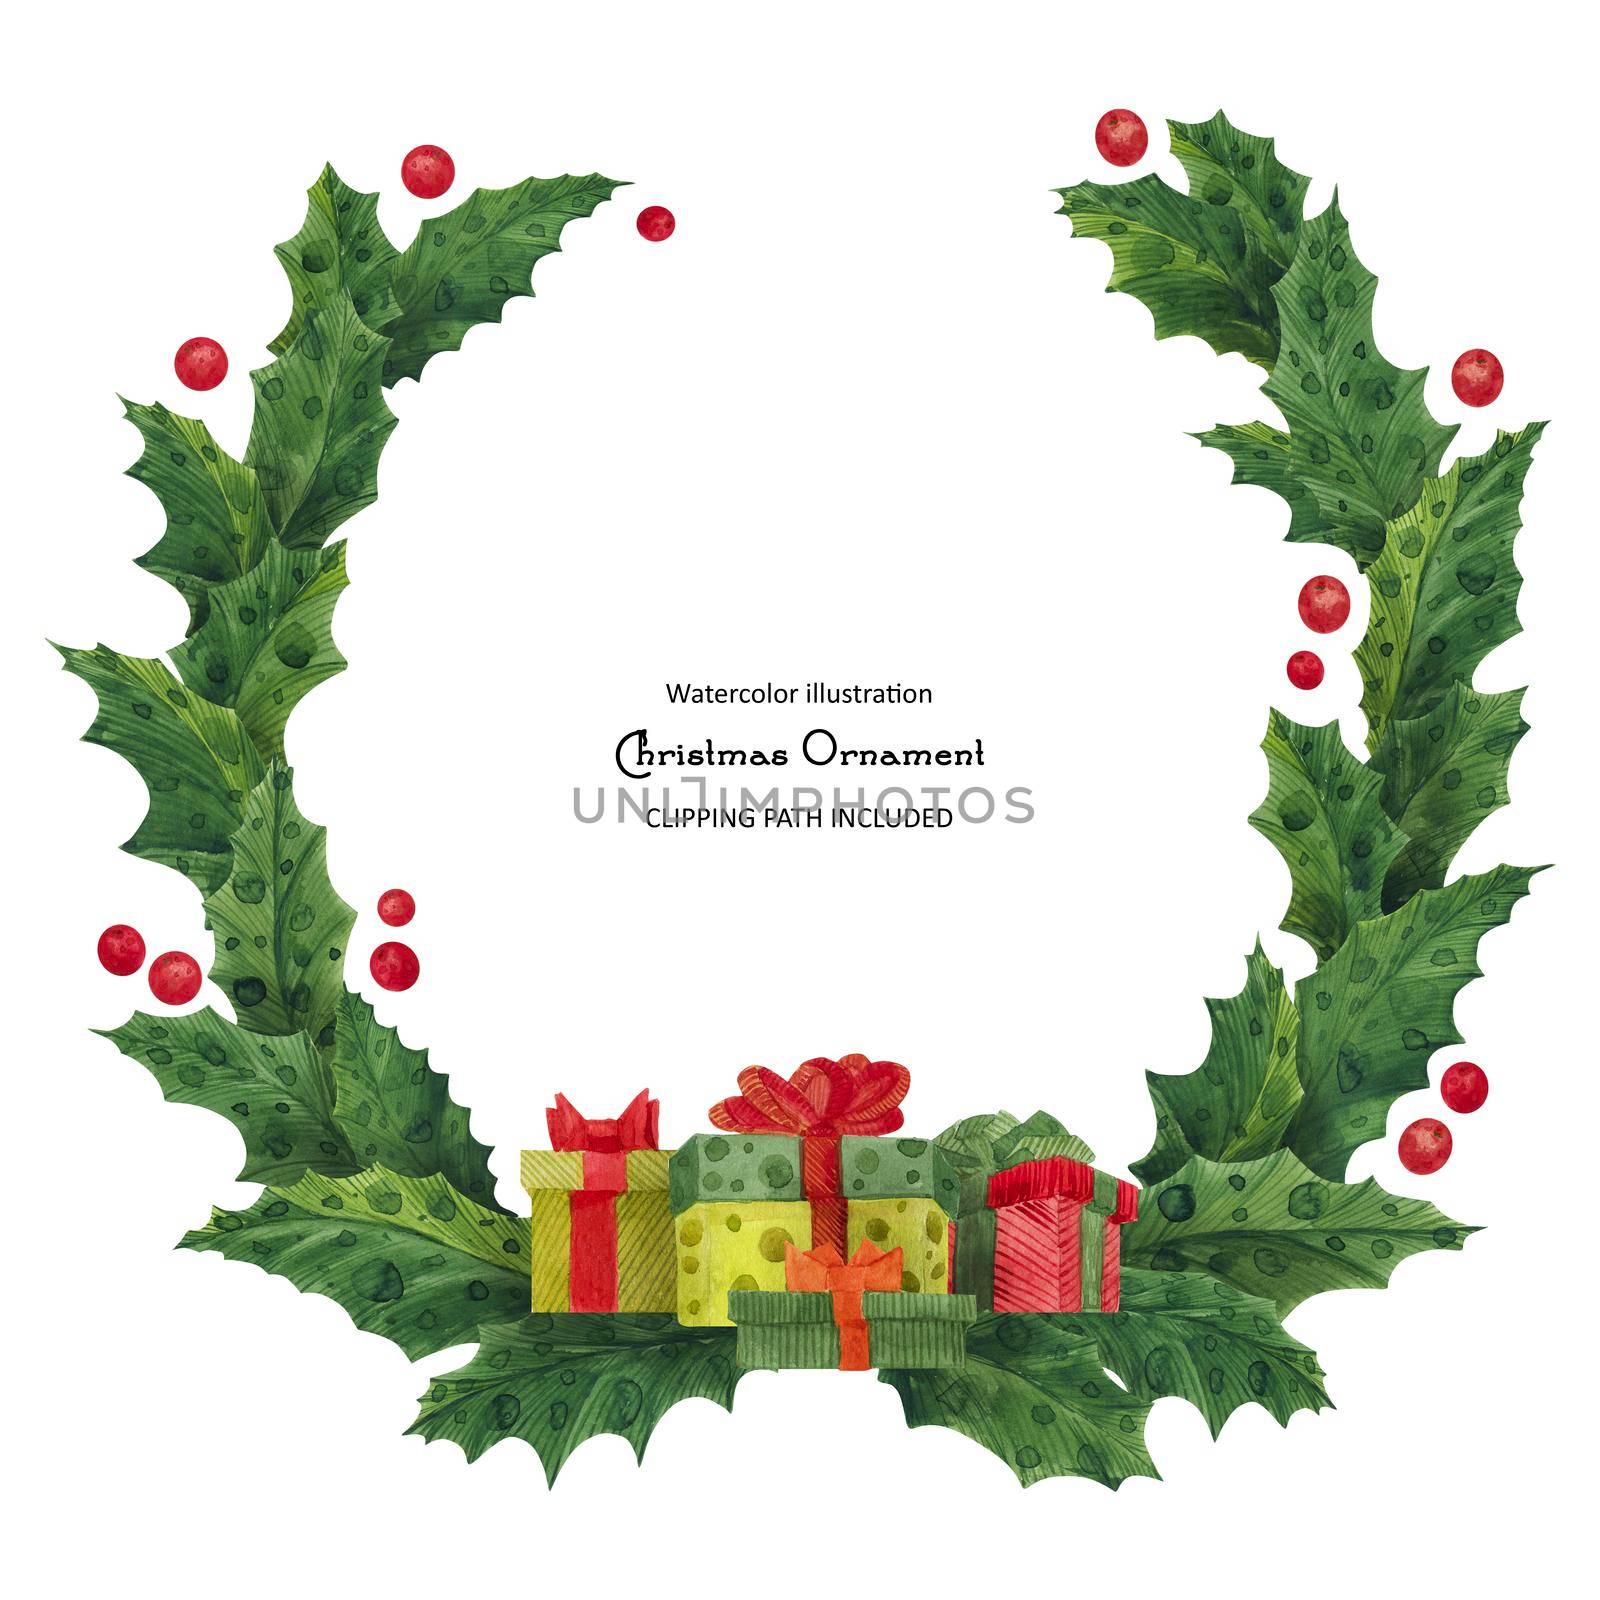 Christmas holly wreath with gift boxes and candy canes, watercolor illustration by Xeniasnowstorm